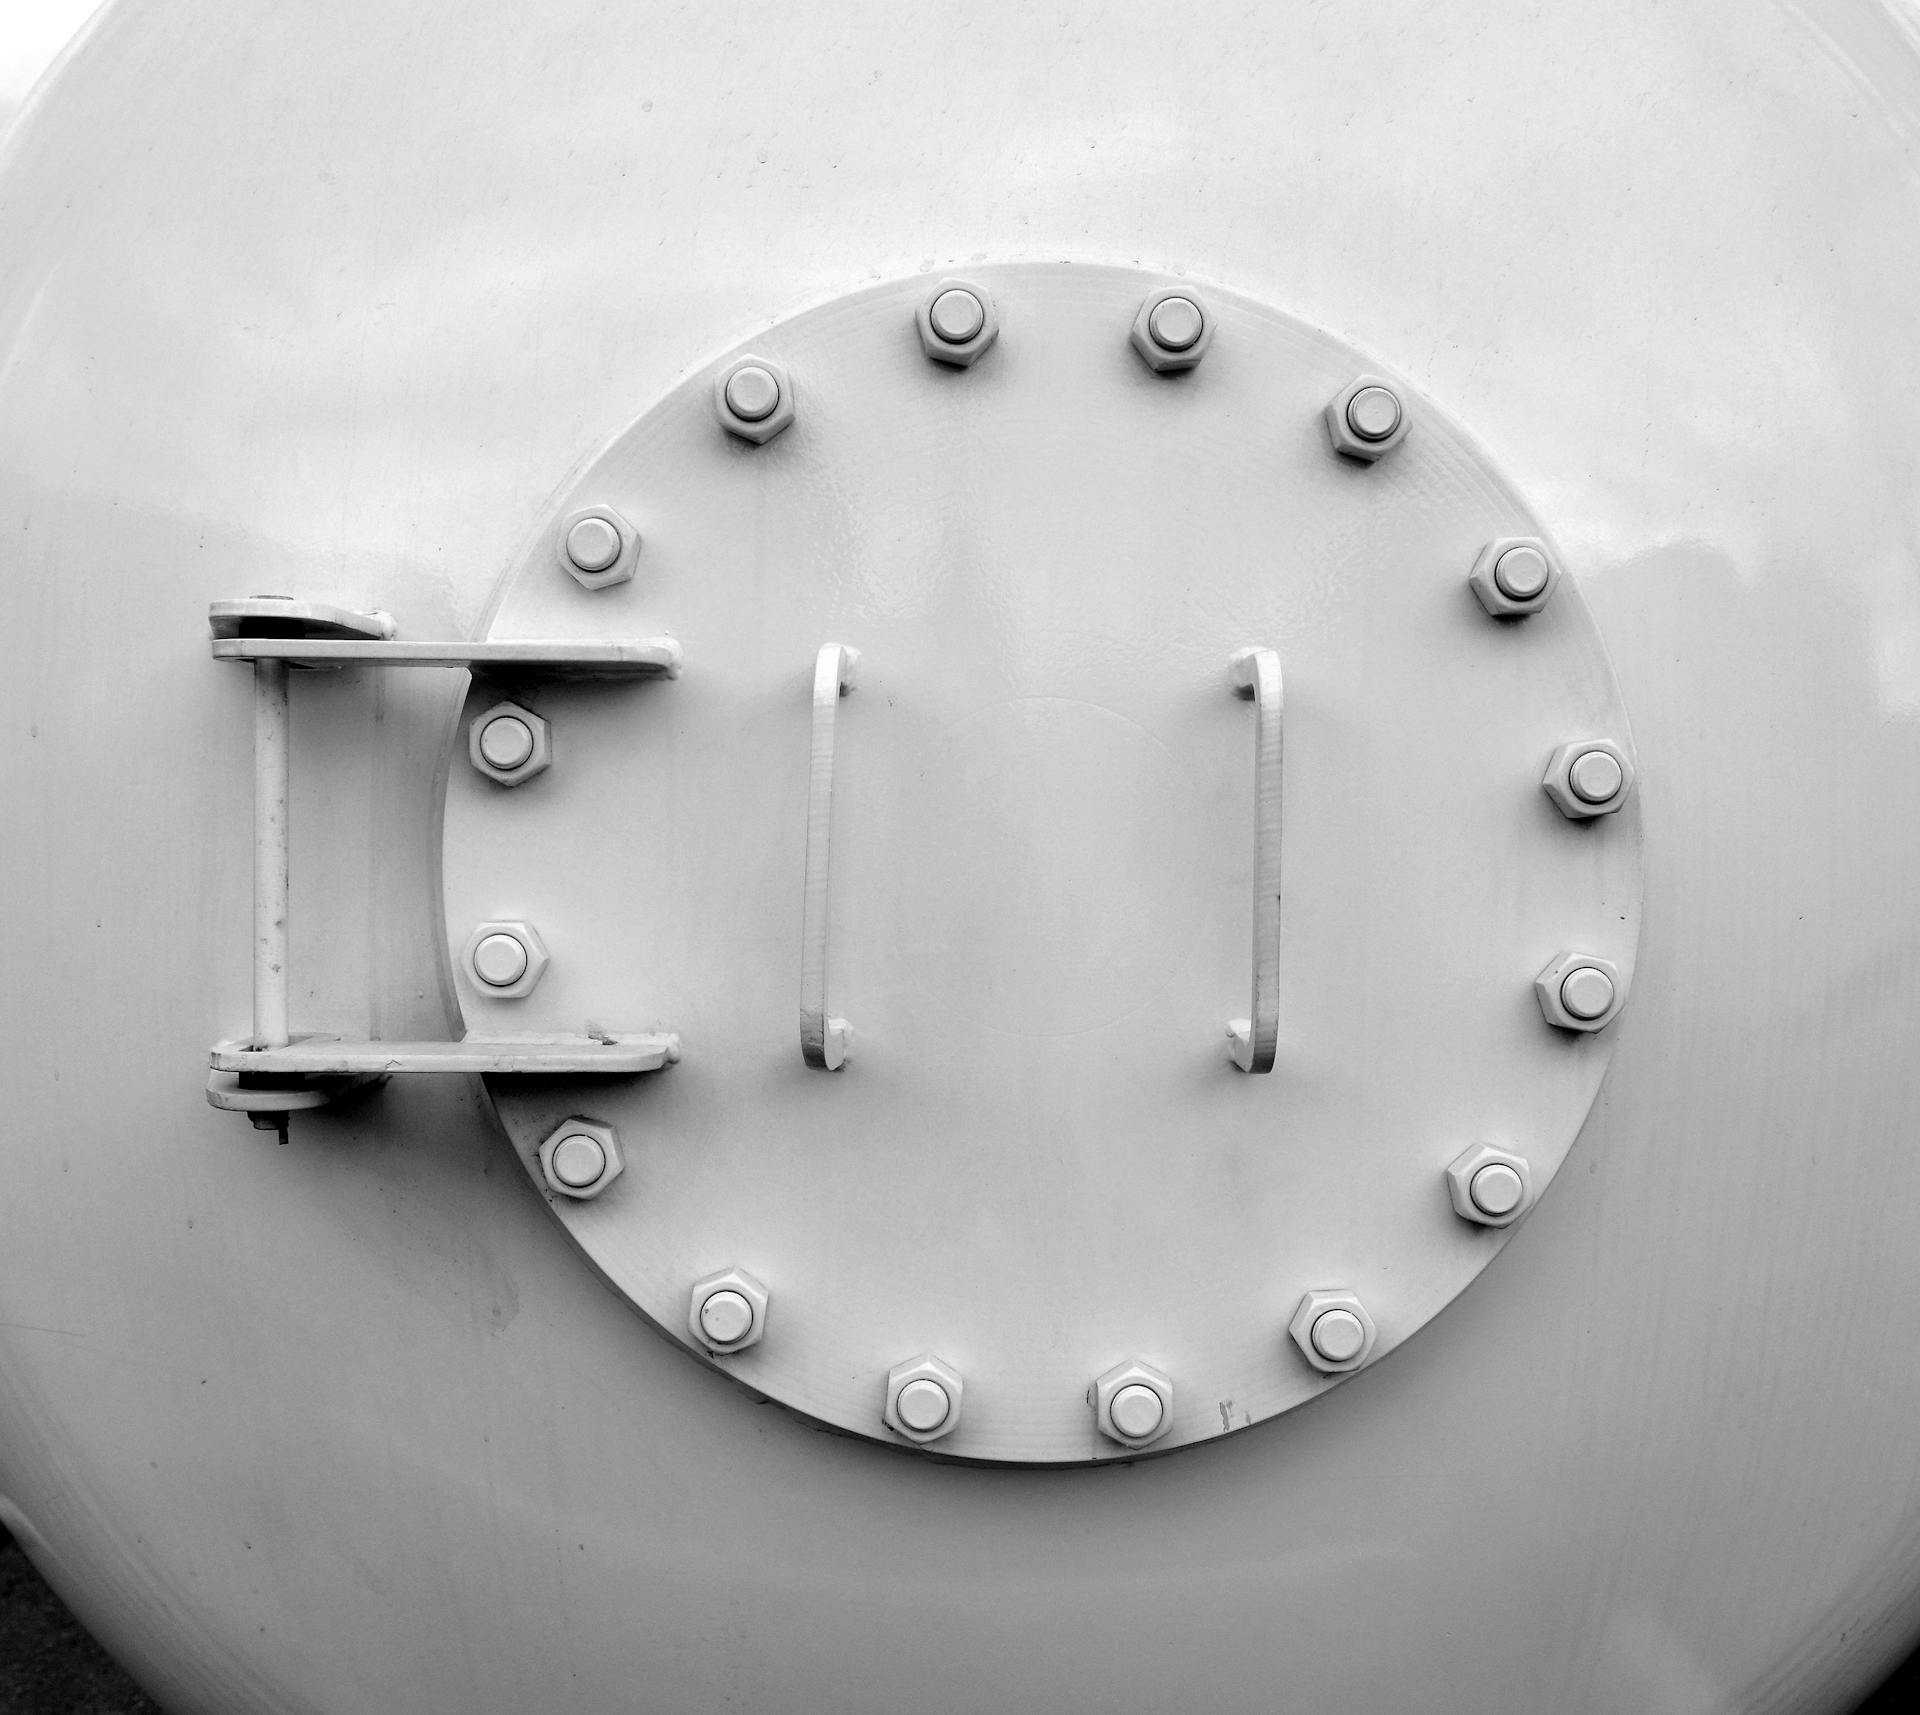 A grey image of a heavy metallic round door with large secure screws and bolts for safety